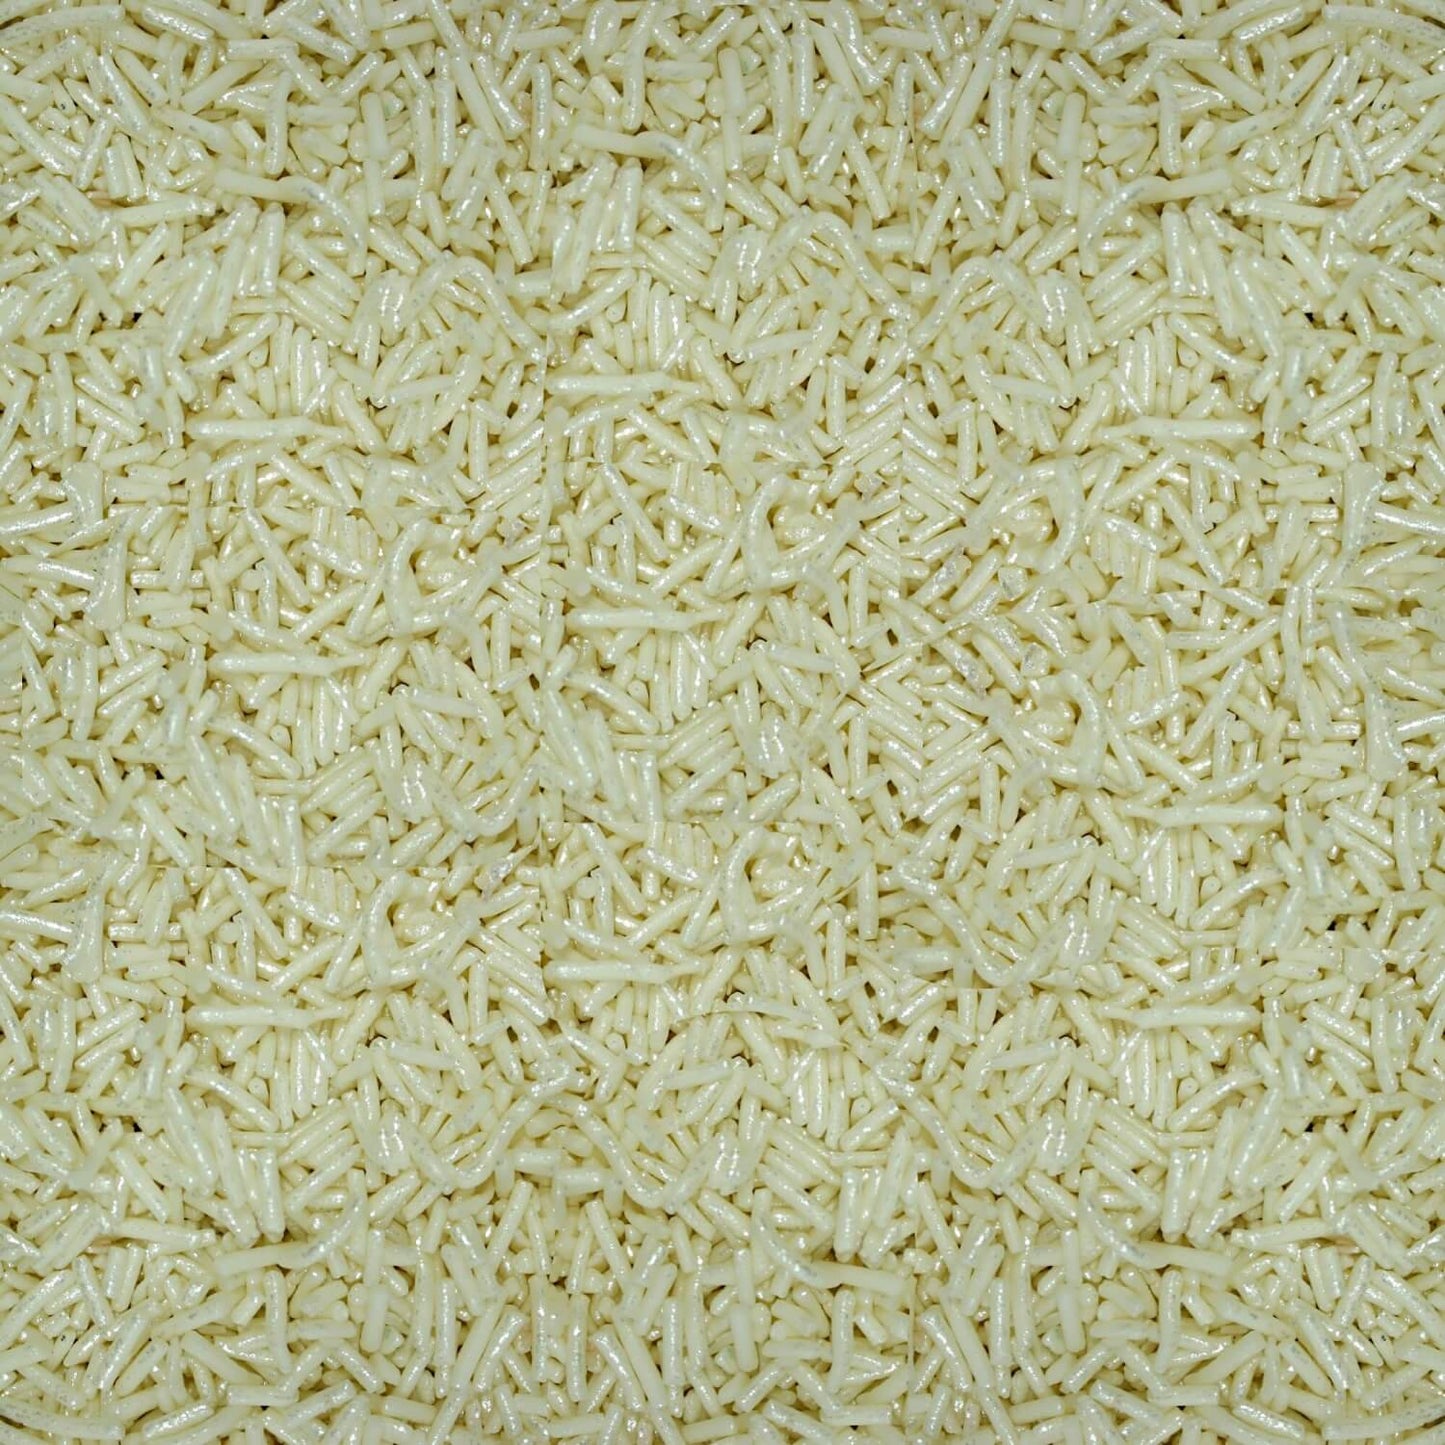 Confect White Vermicelli Sprinkles 90 Gms